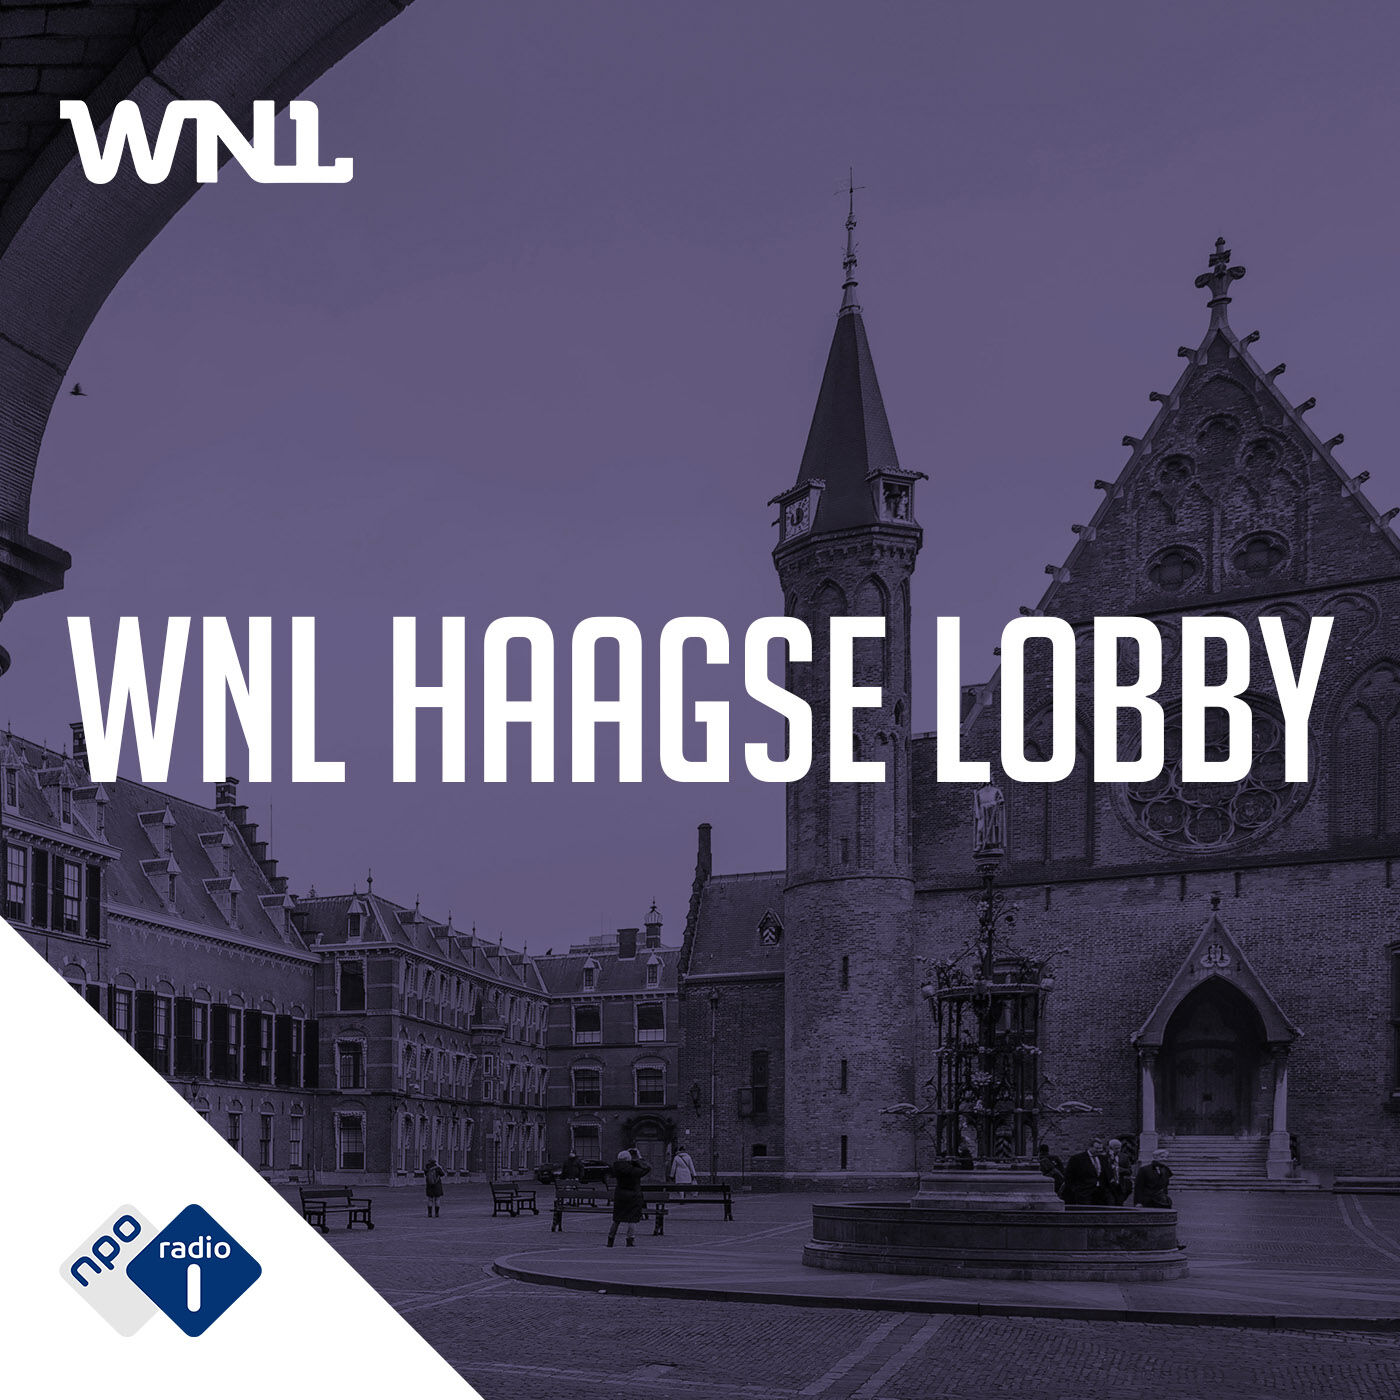 WNL Haagse Lobby podcast show image